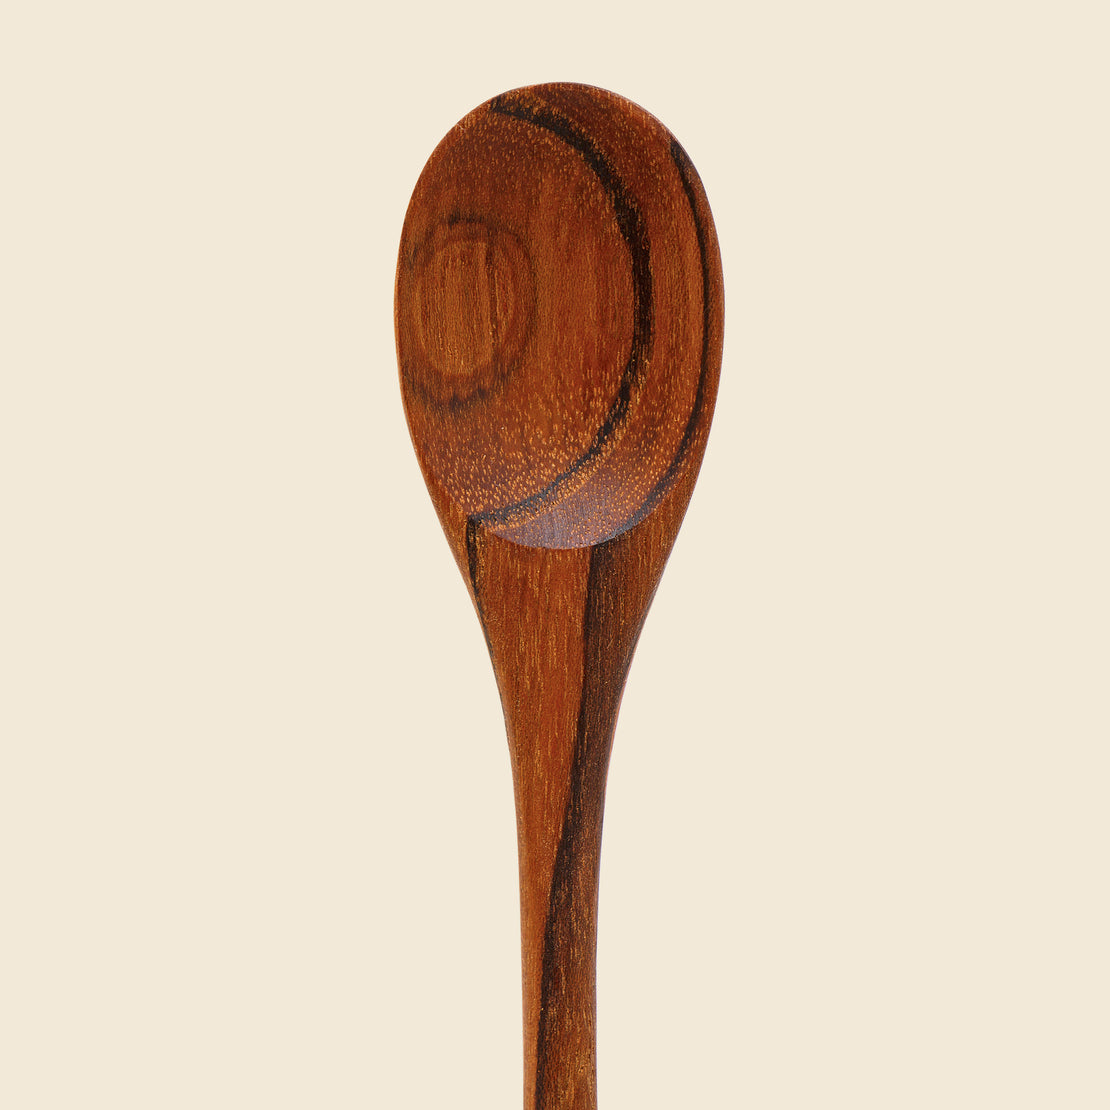 Teak Long Tasting Spoon - Home - STAG Provisions - Home - Kitchen - Tabletop